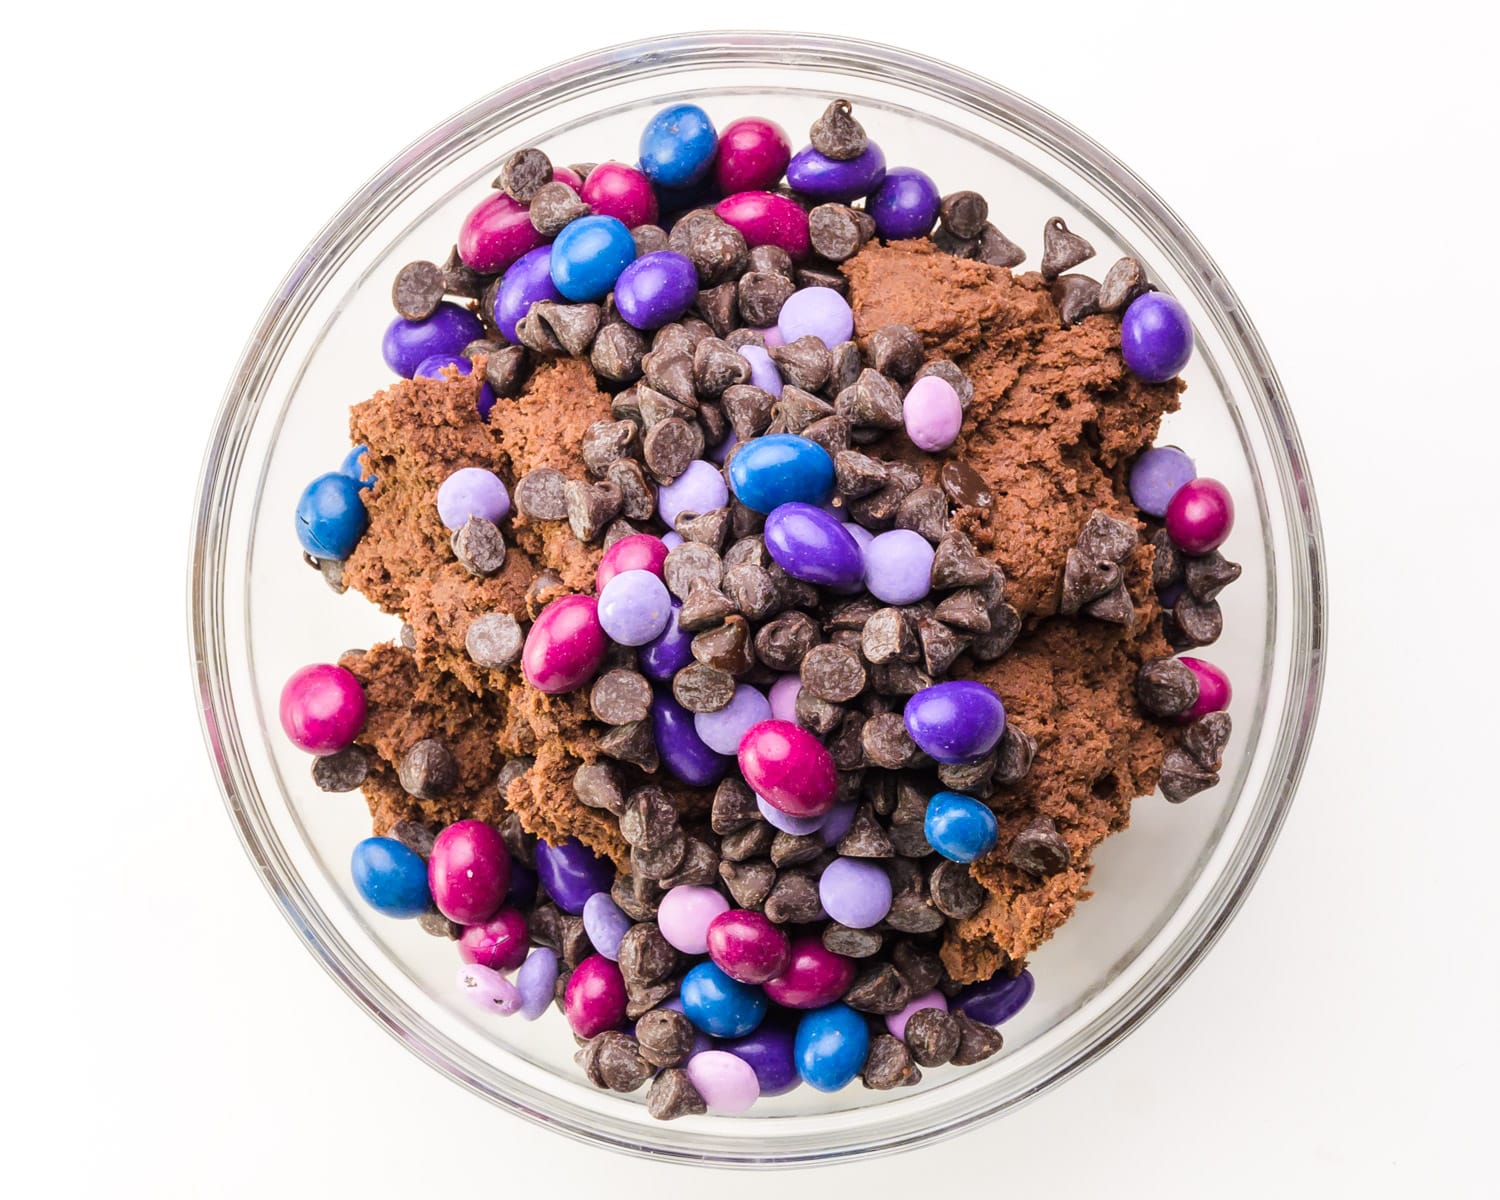 Looking down on a bowl of chocolate cookie dough with colorful candies and chocolate chips on top.